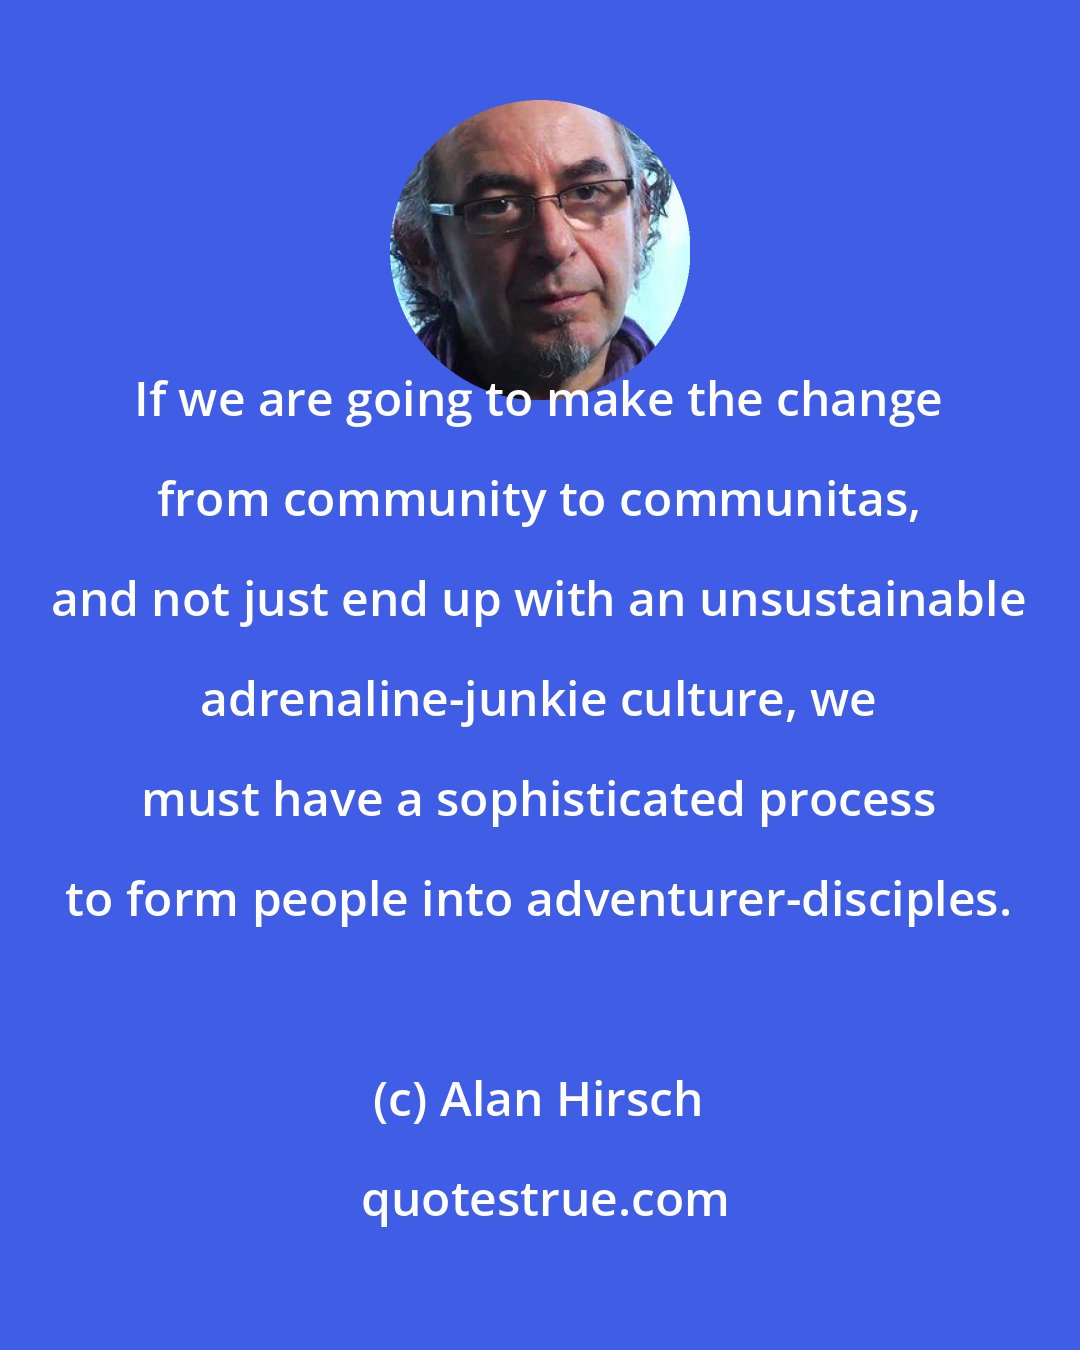 Alan Hirsch: If we are going to make the change from community to communitas, and not just end up with an unsustainable adrenaline-junkie culture, we must have a sophisticated process to form people into adventurer-disciples.